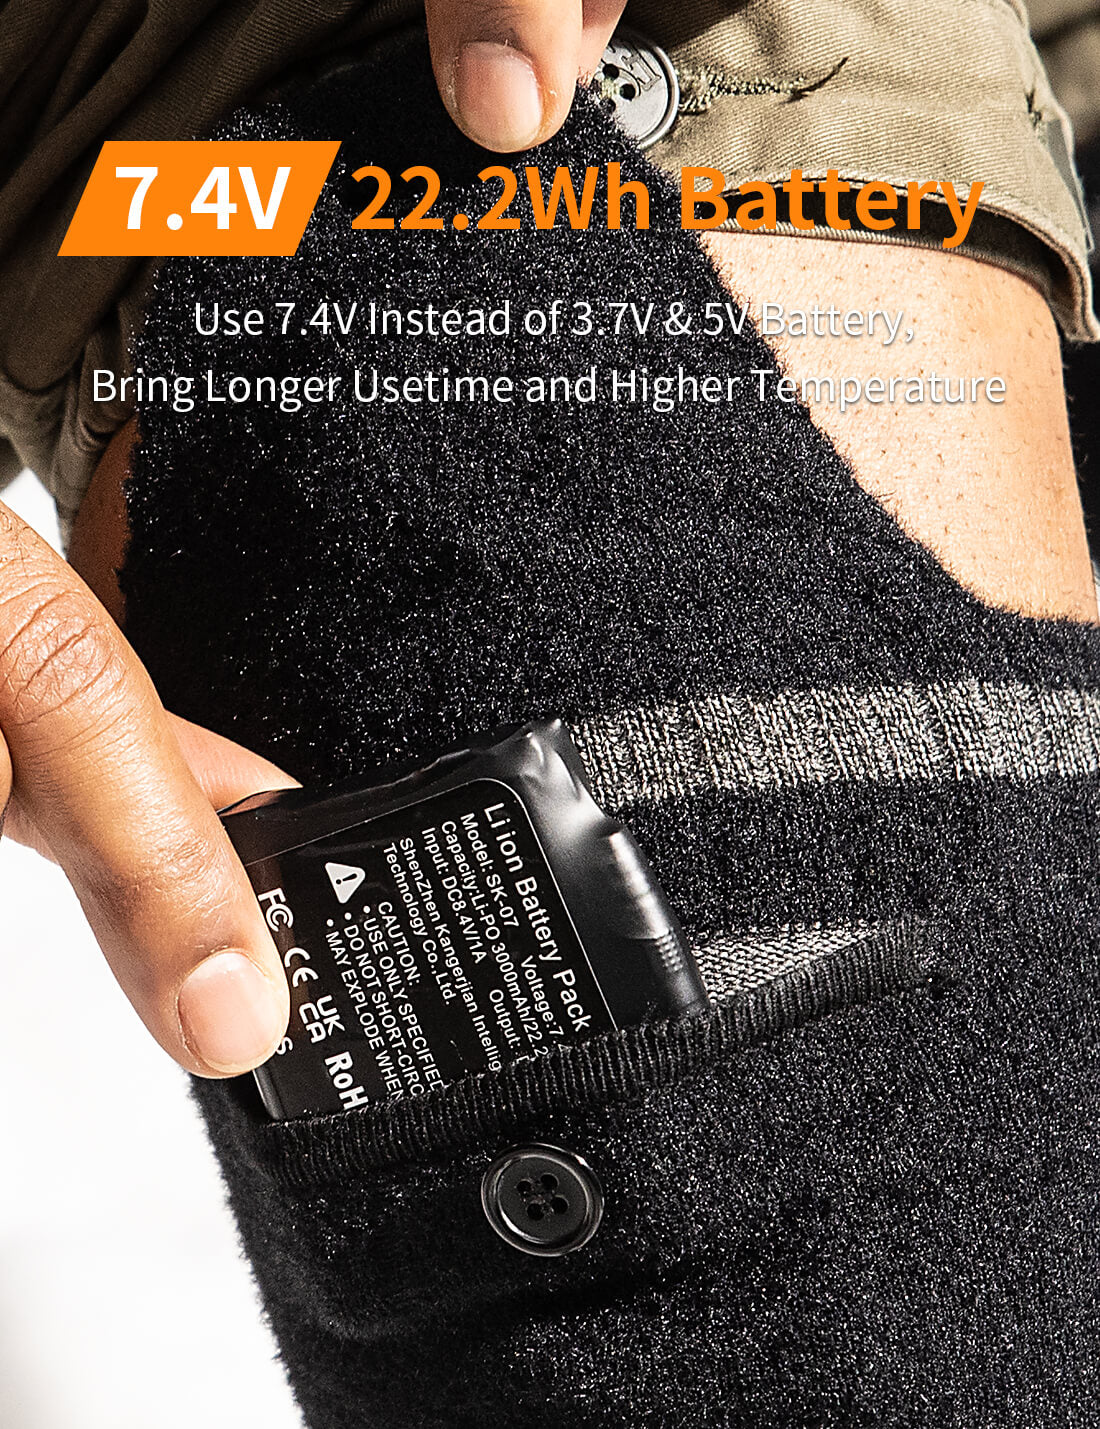 Heated Socks for Men and Women with App Control 7.4V 3000mAh Battery, L